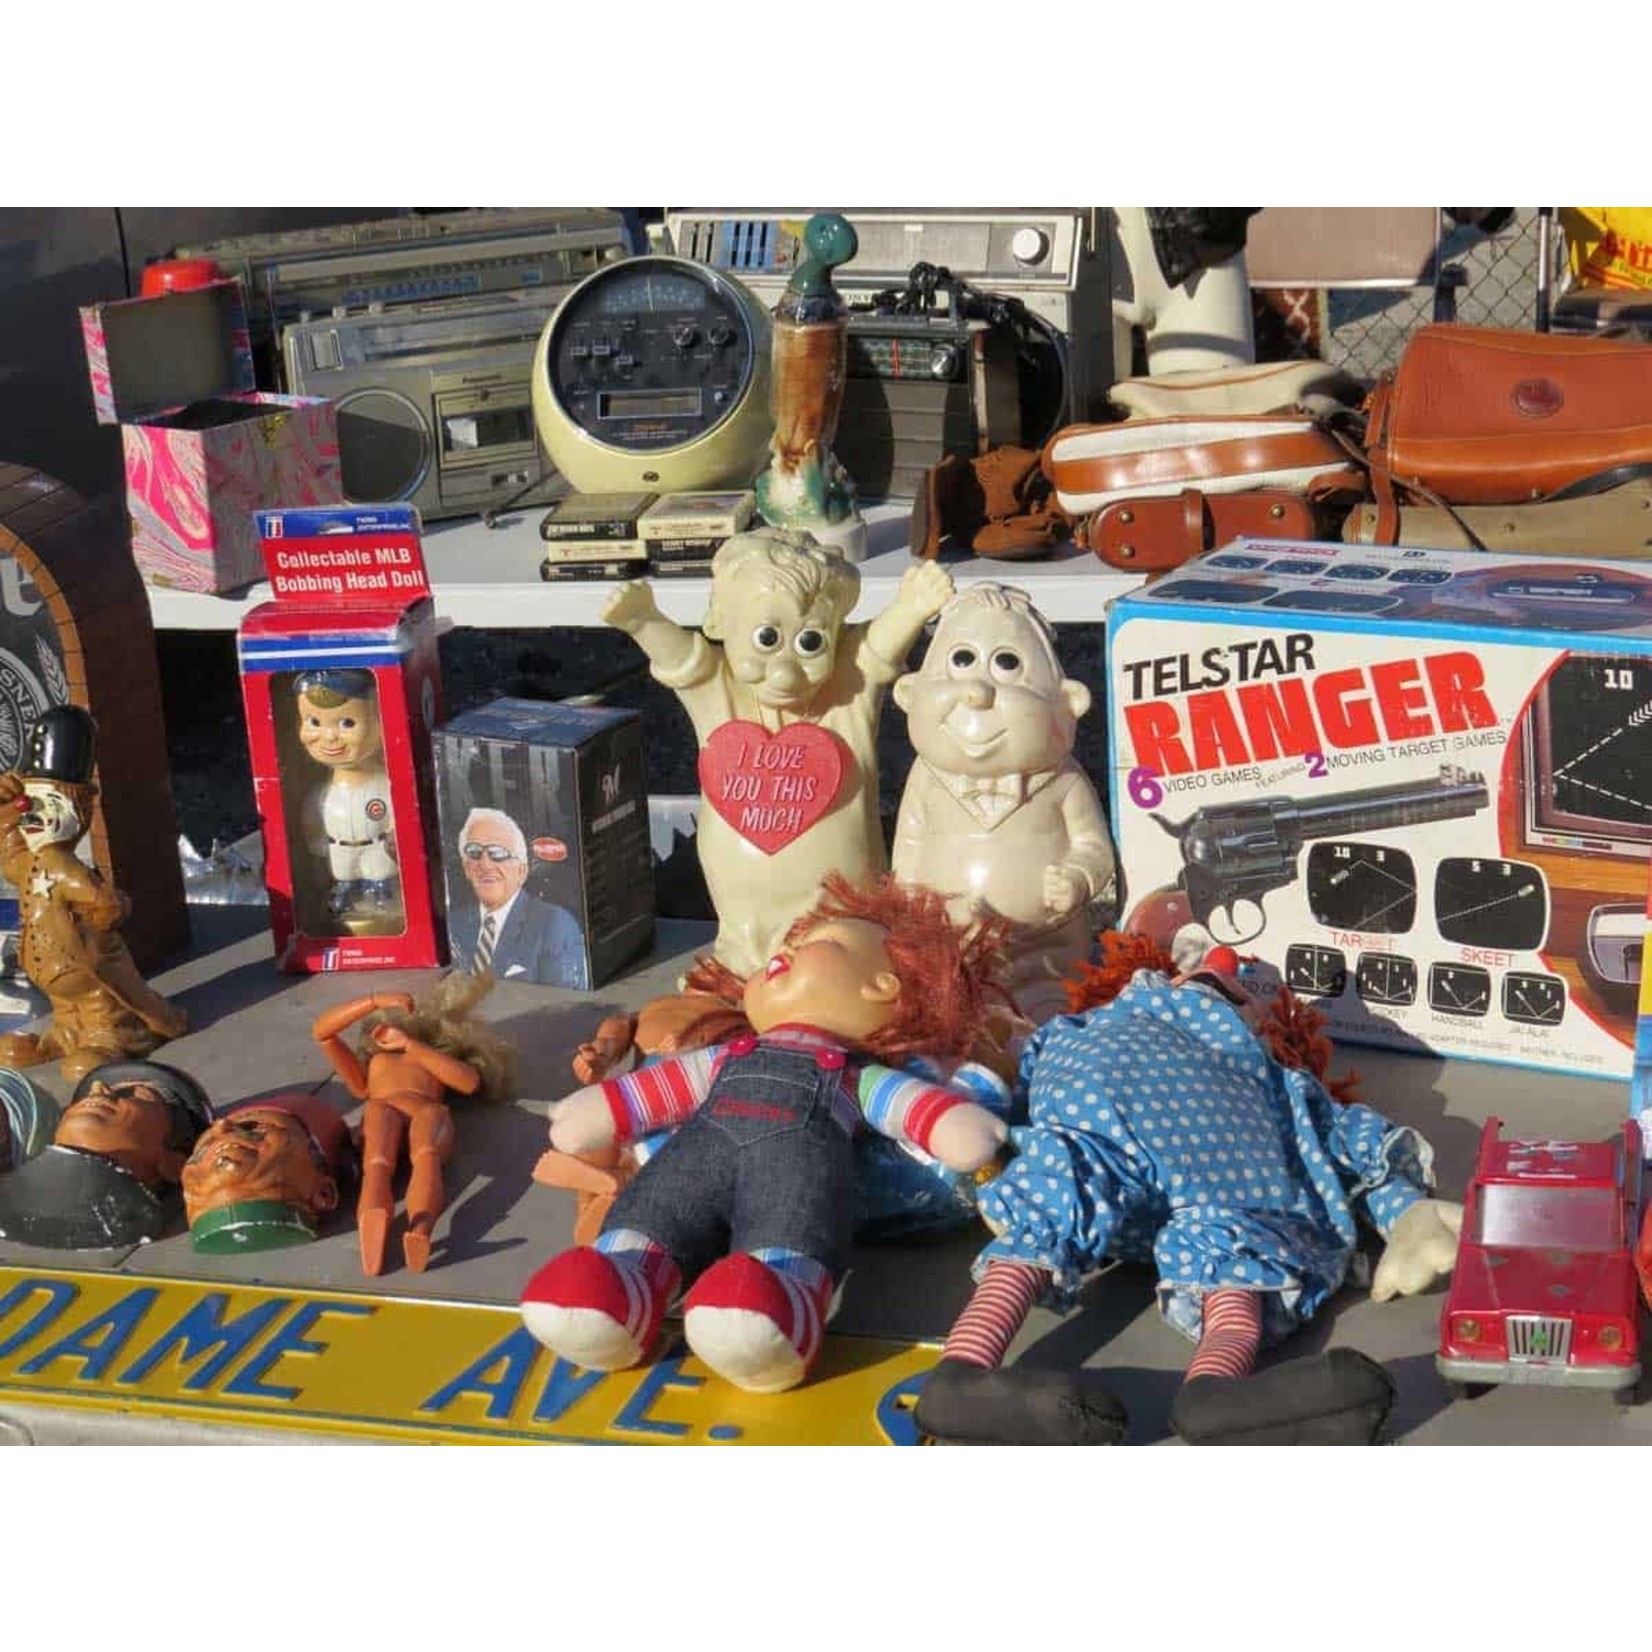 Zurko Promotions-Chicagoland Wheaton Antiques Collectibles Fall Market 11/19